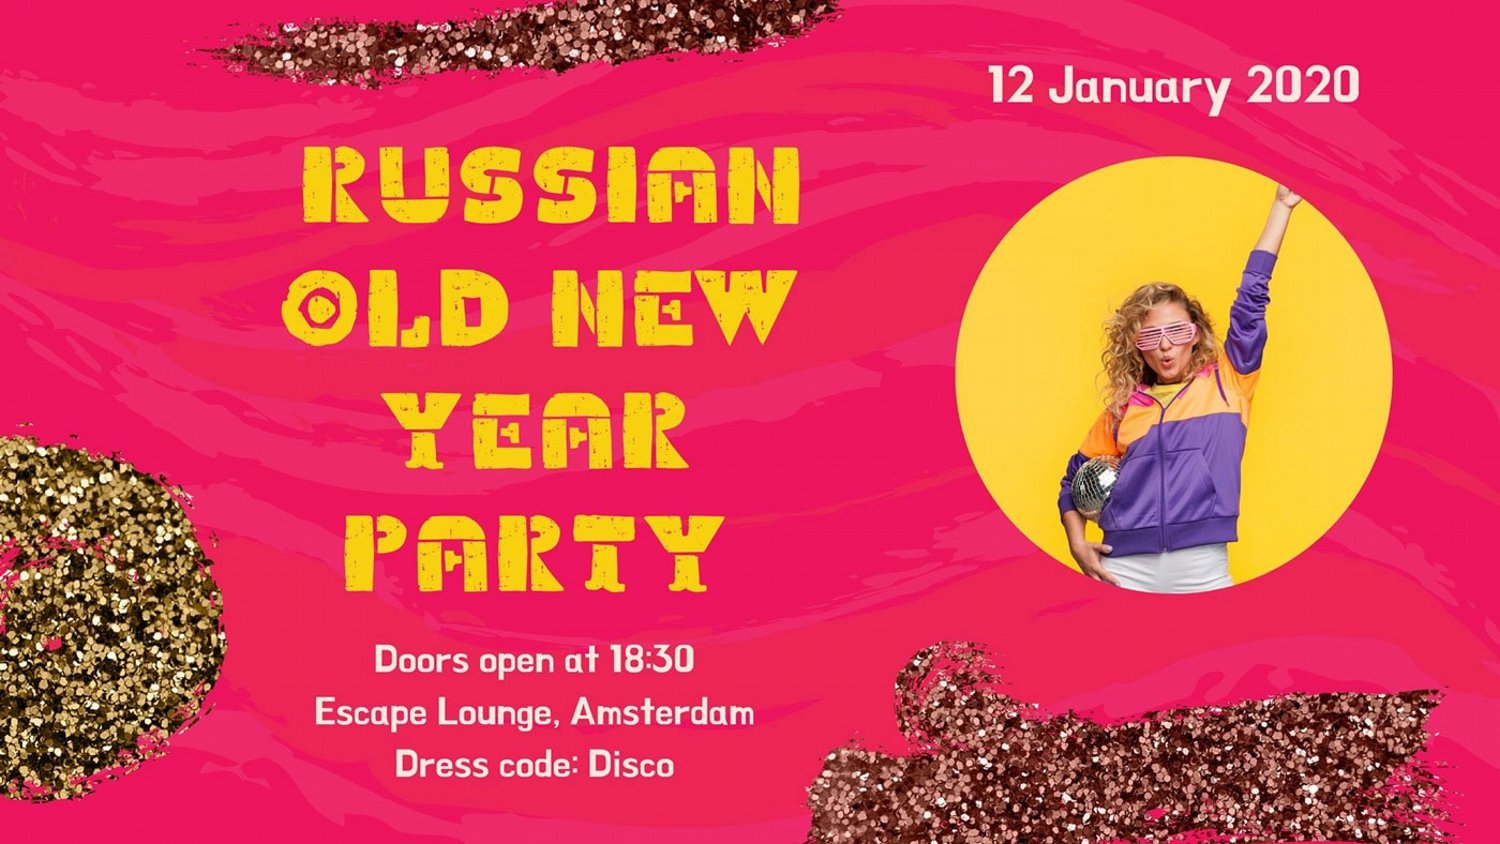 Russian Old New Year Party